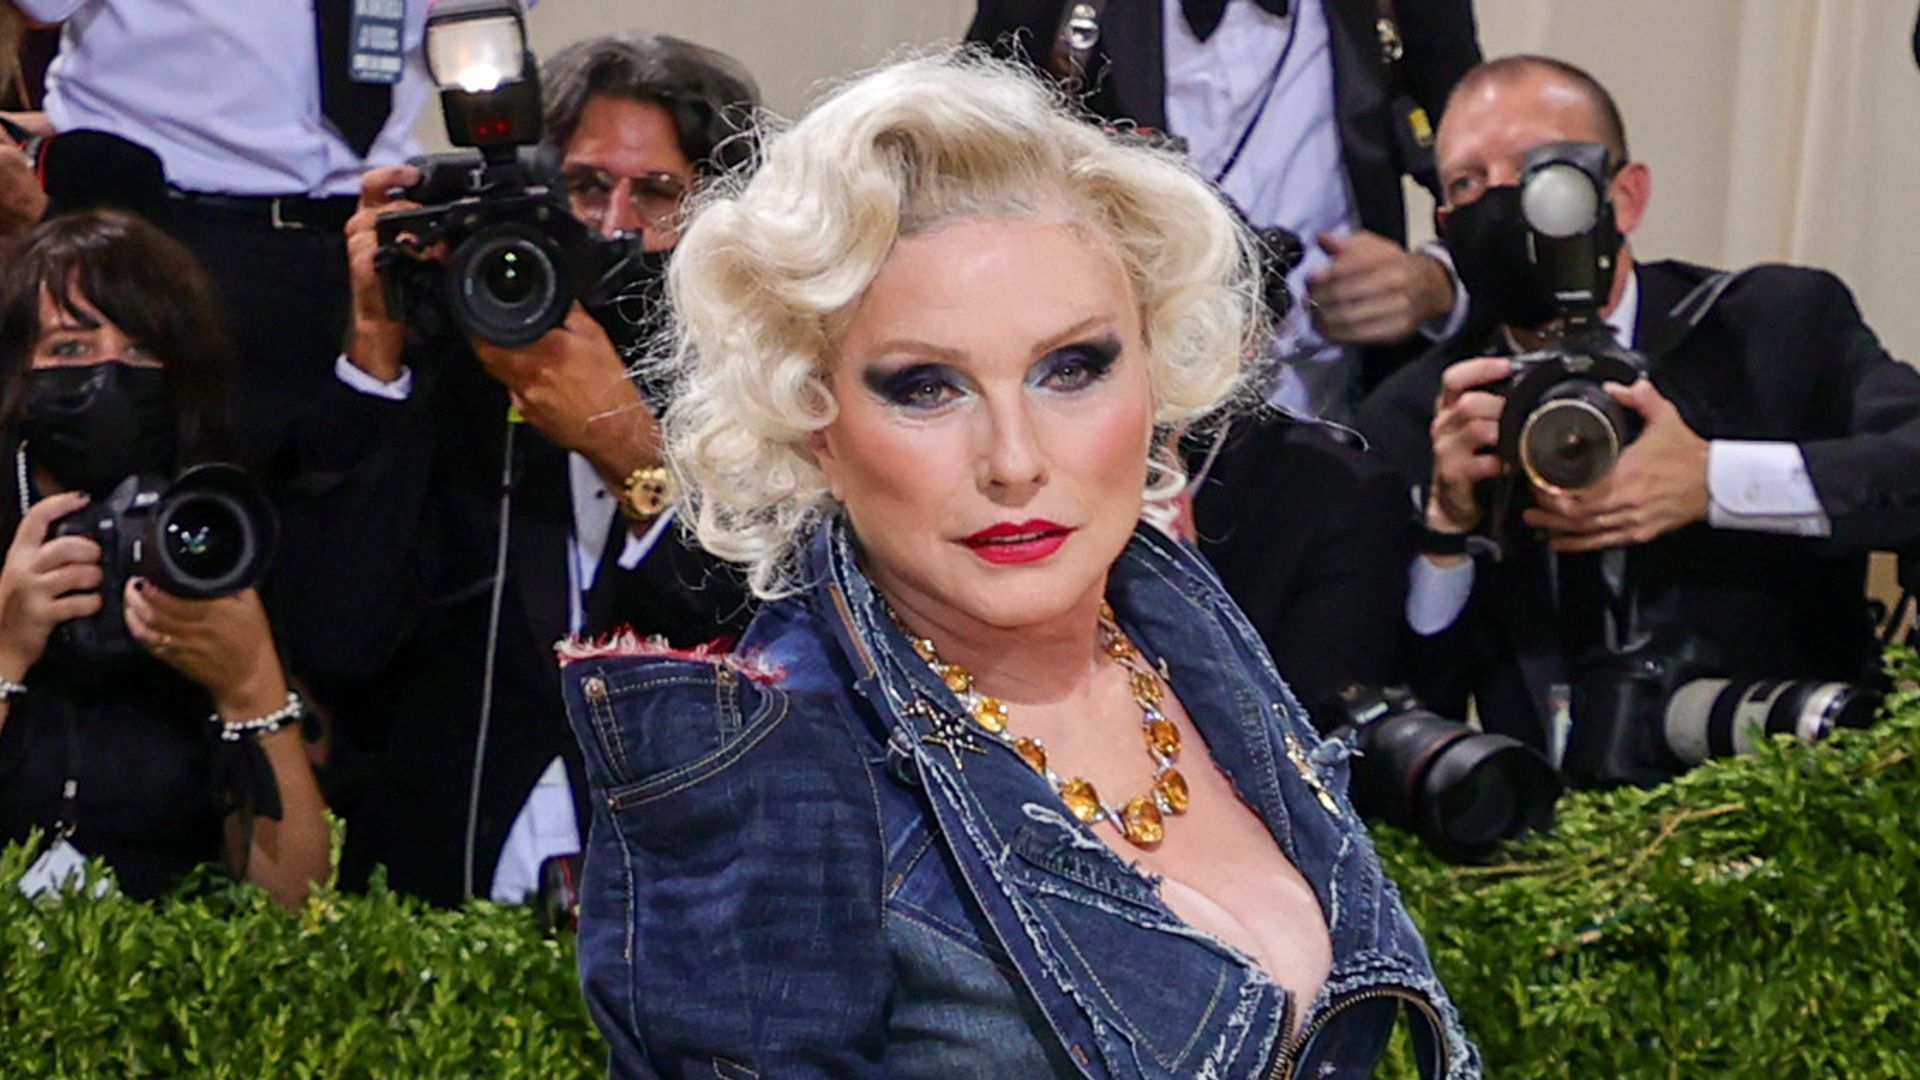 Debbie Harry attends The 2021 Met Gala Celebrating In America: A Lexicon Of Fashion at Metropolitan Museum of Art on September 13, 2021 in New York City.